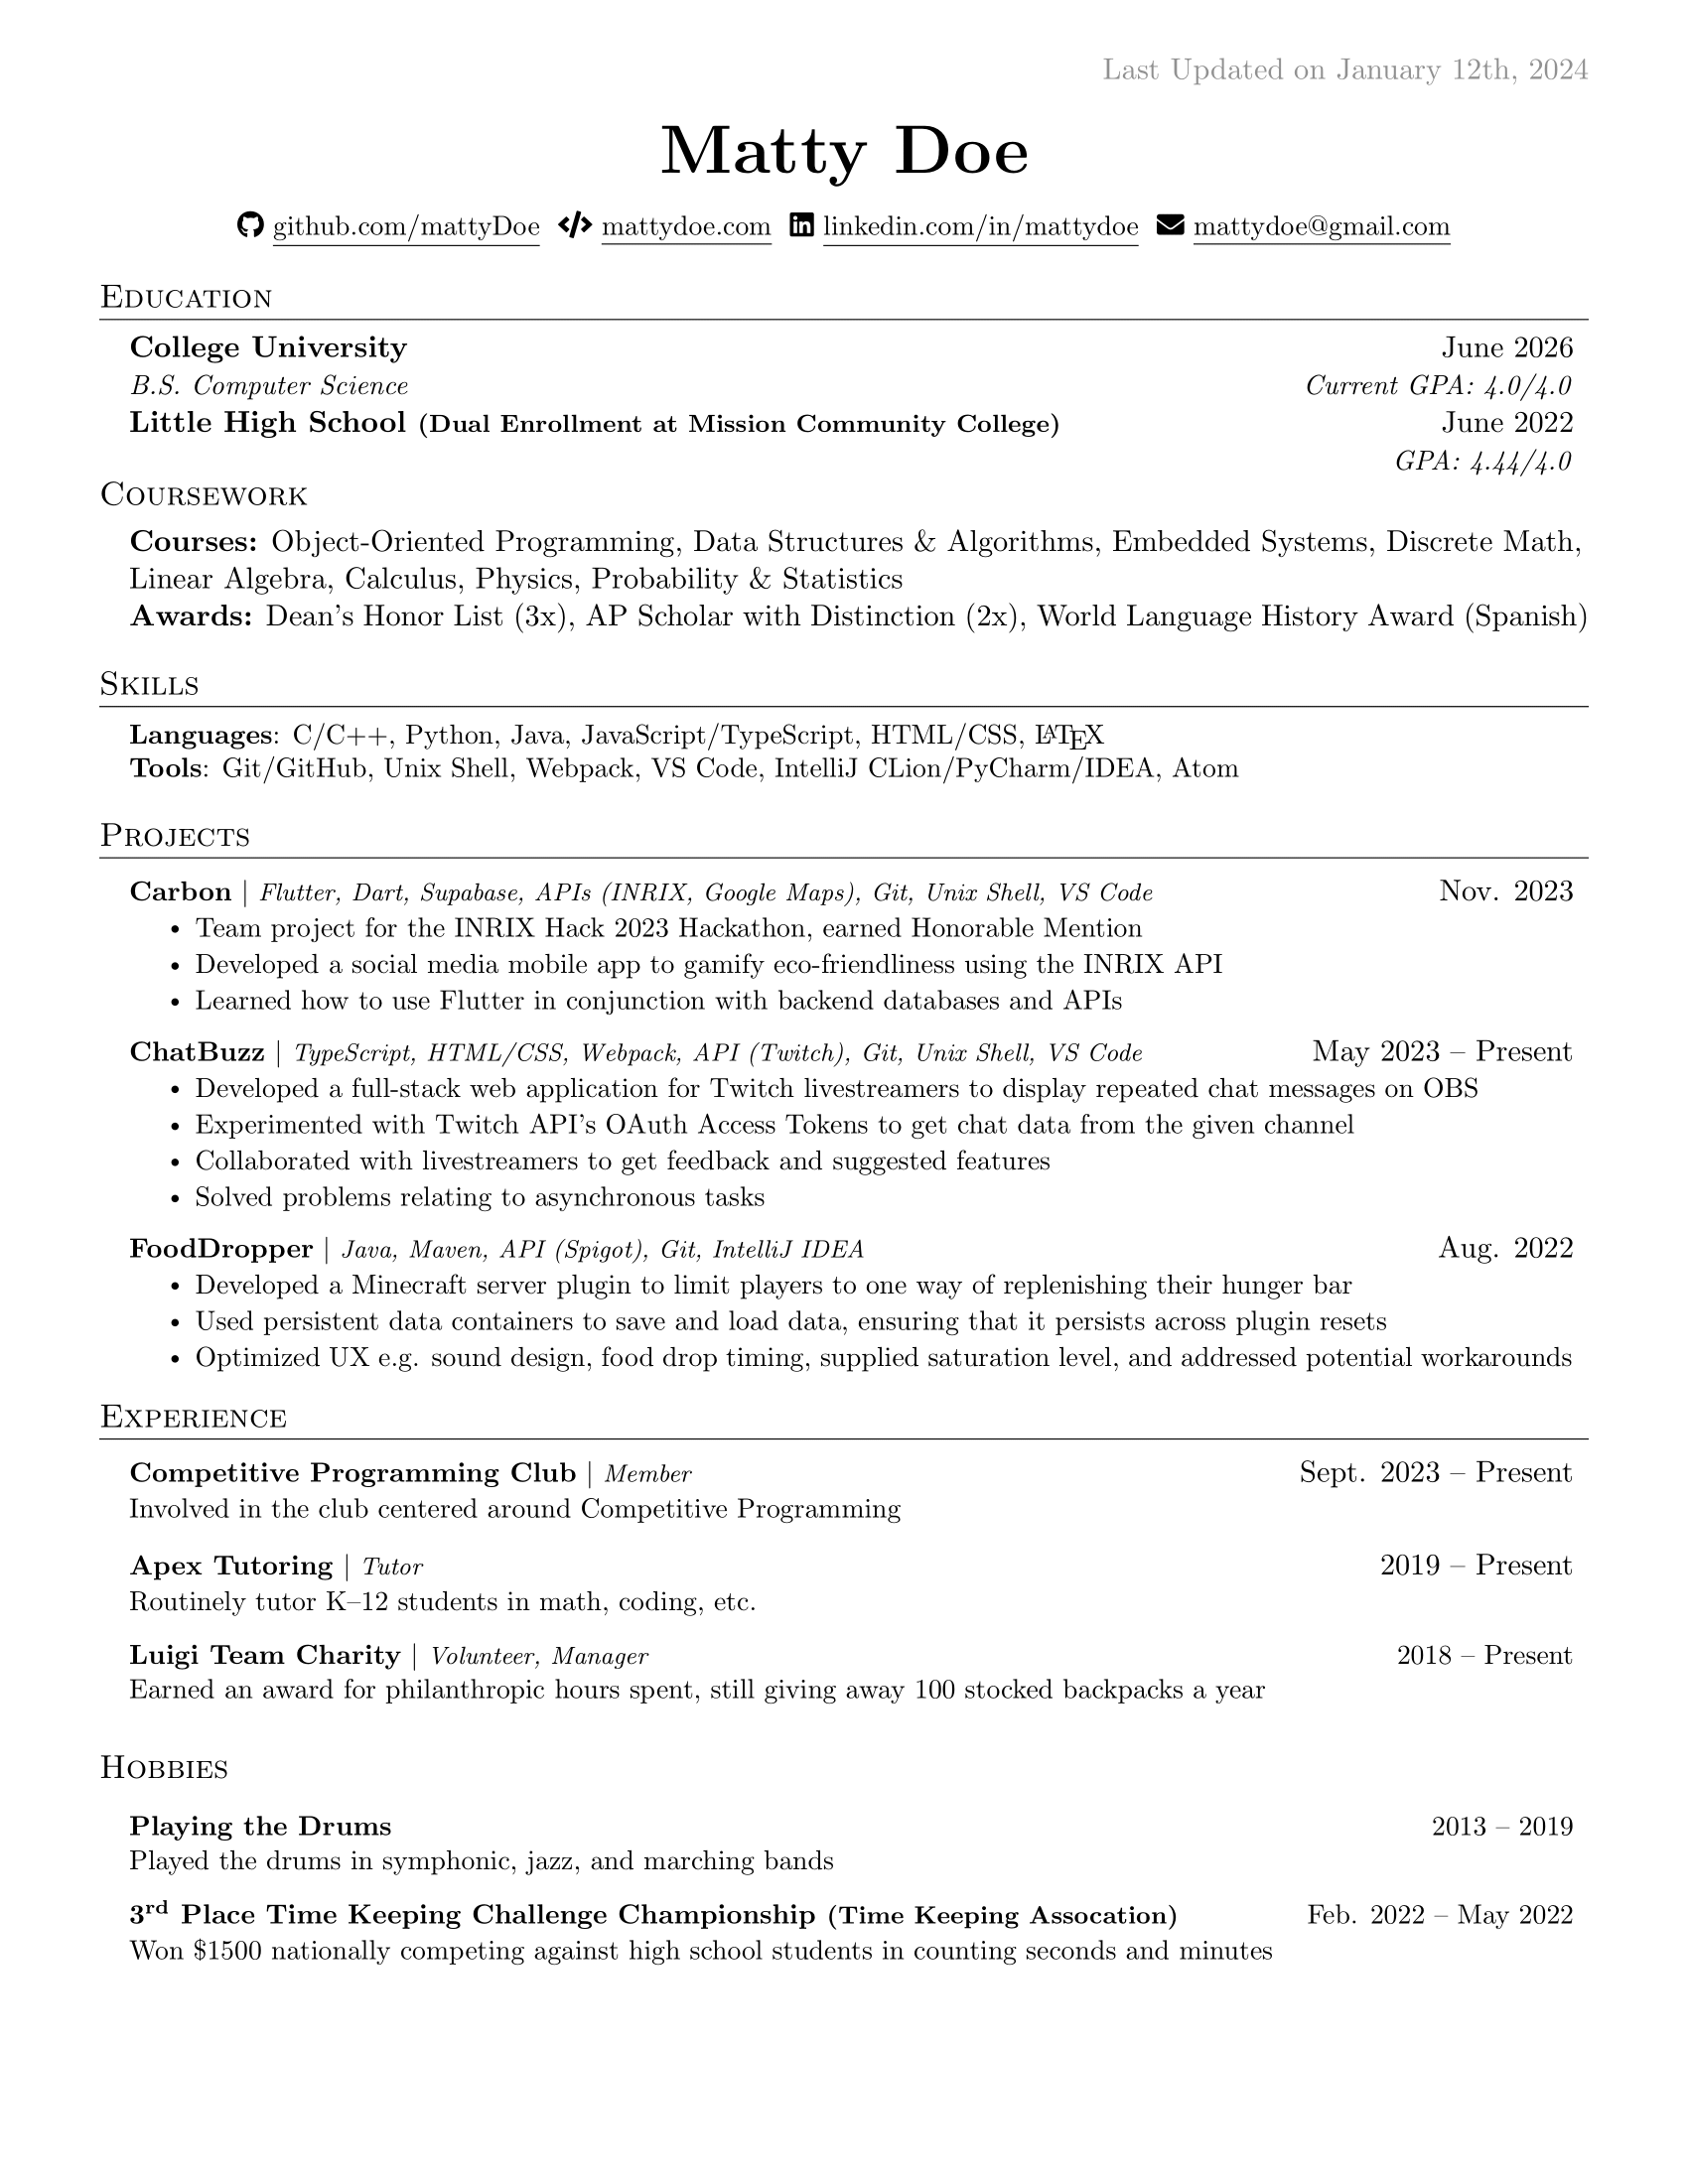 Matty's Resume Preview